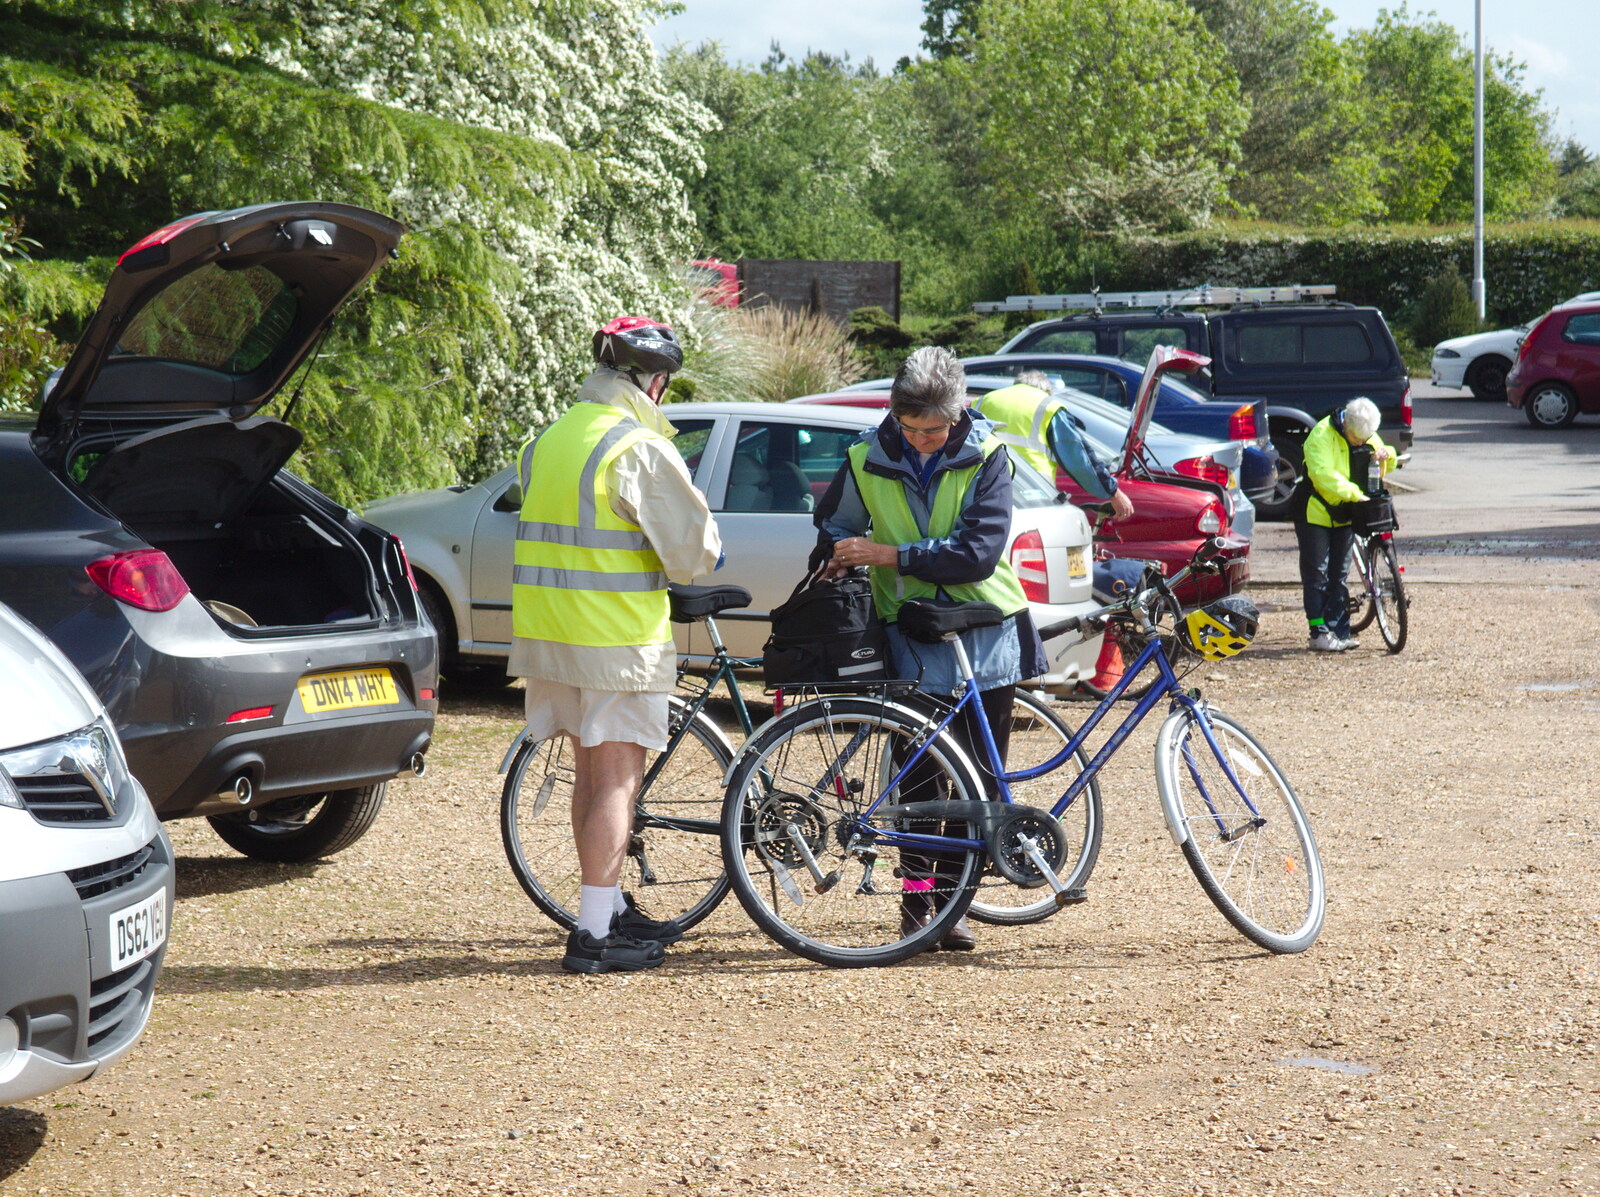 Colin and Jill get their bikes ready from A Return to Bedford: the BSCC Annual Weekend Away, Shefford, Bedfordshire - 10th May 2014